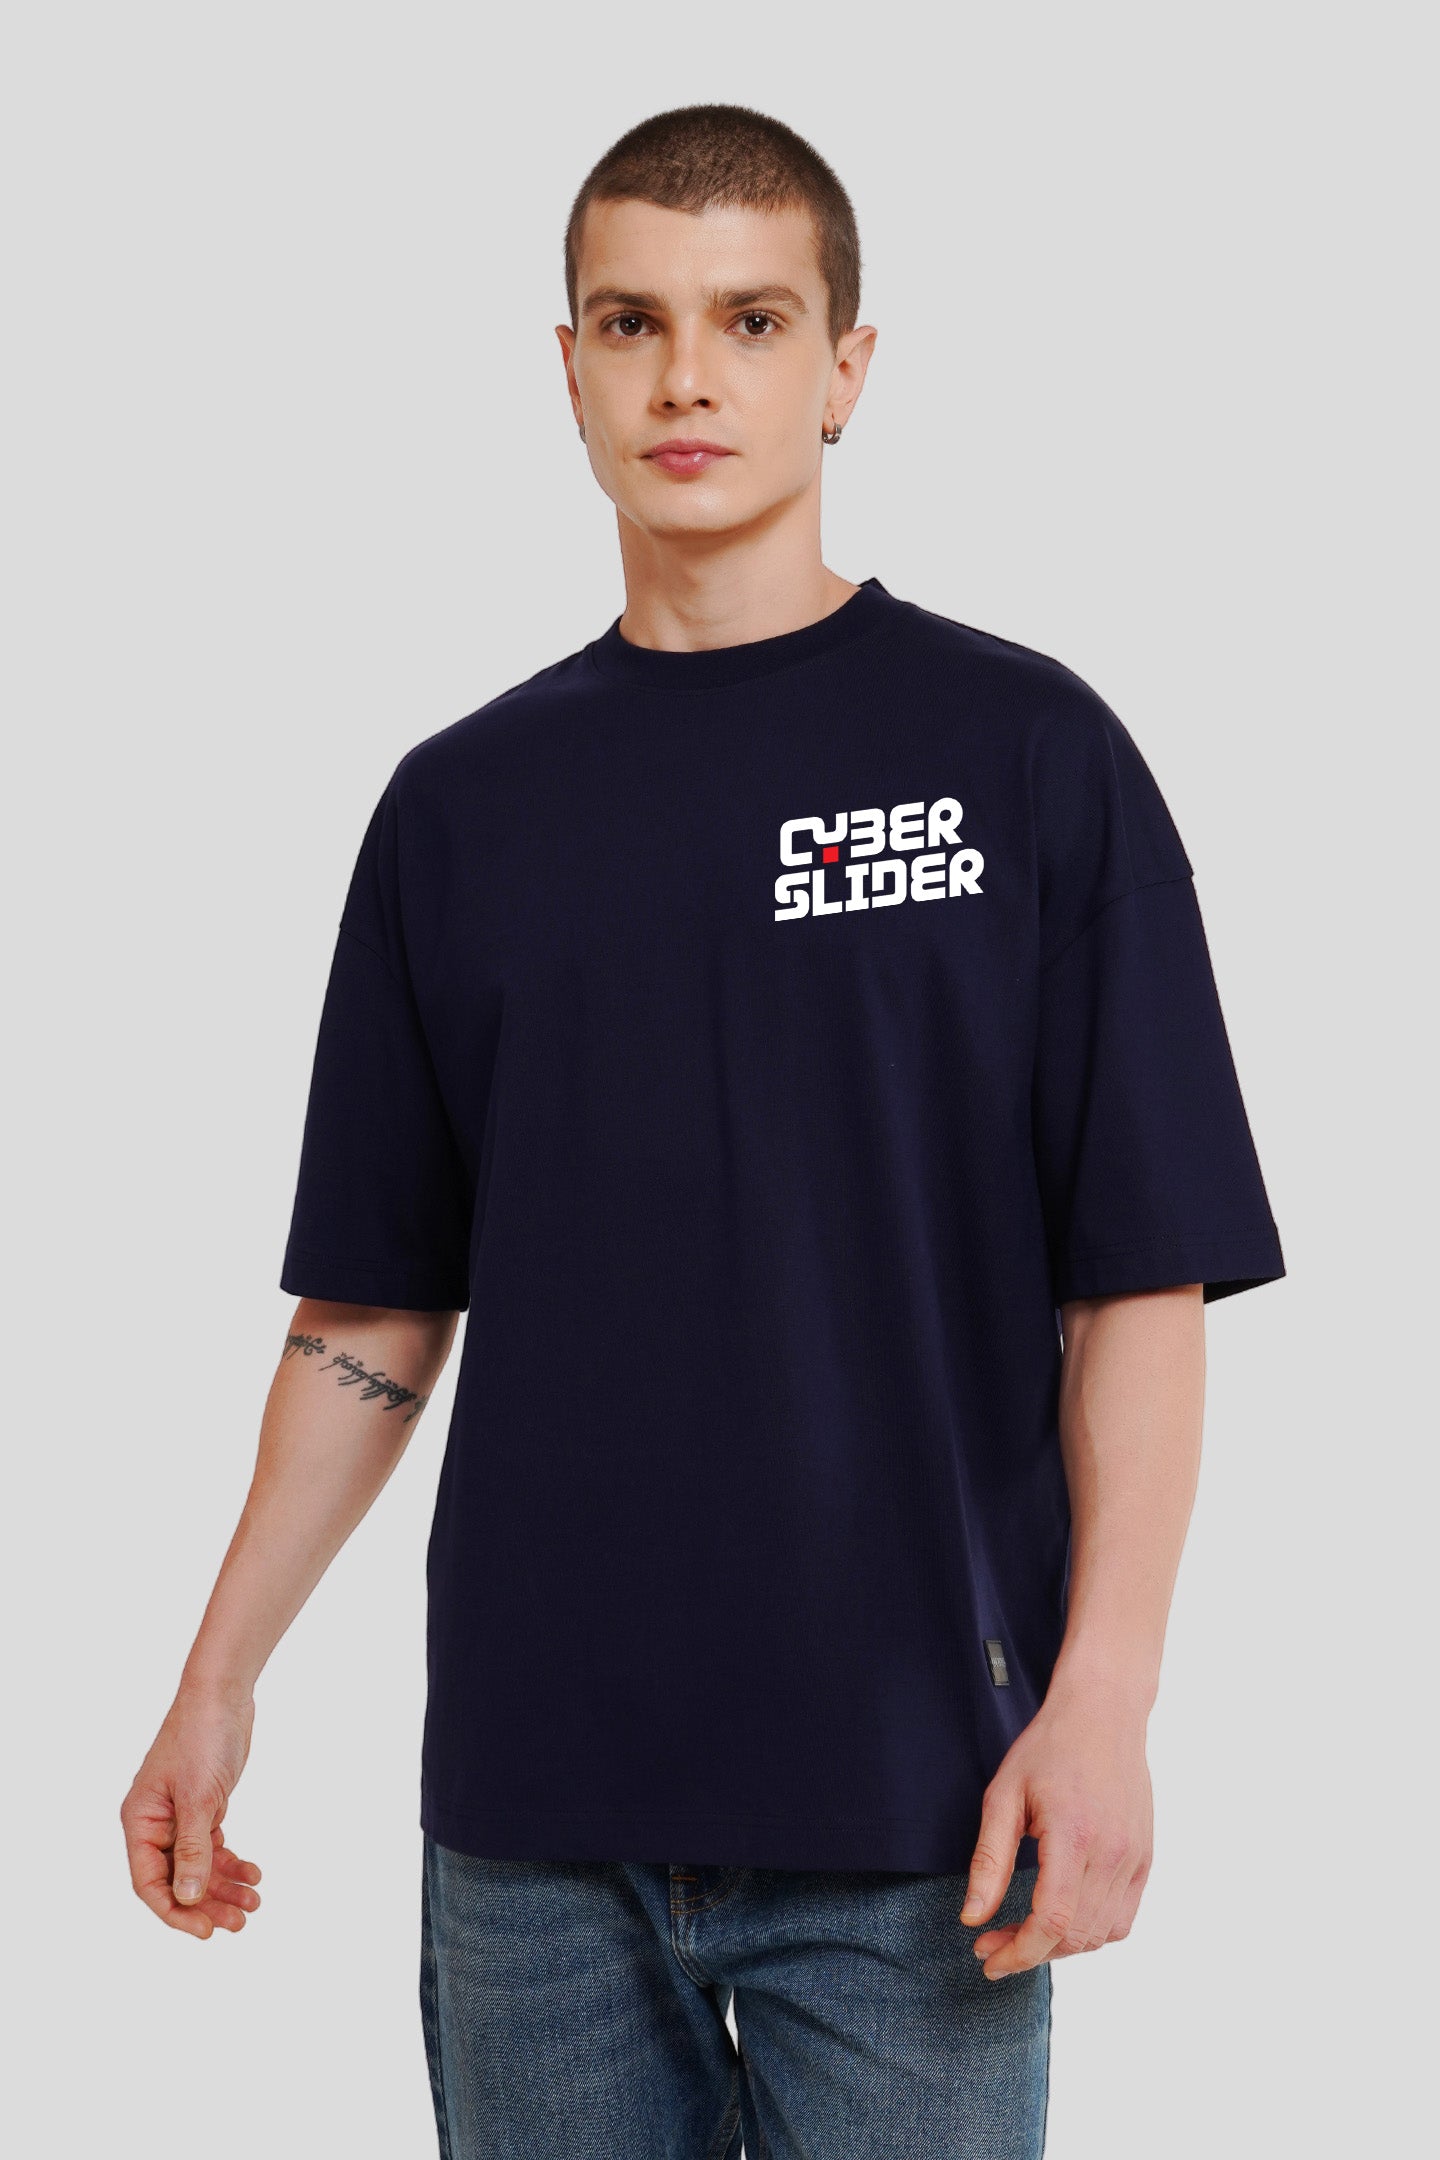 Cyber Slider Navy Blue Printed T Shirt Men Baggy Fit With Front And Back Design Pic 1